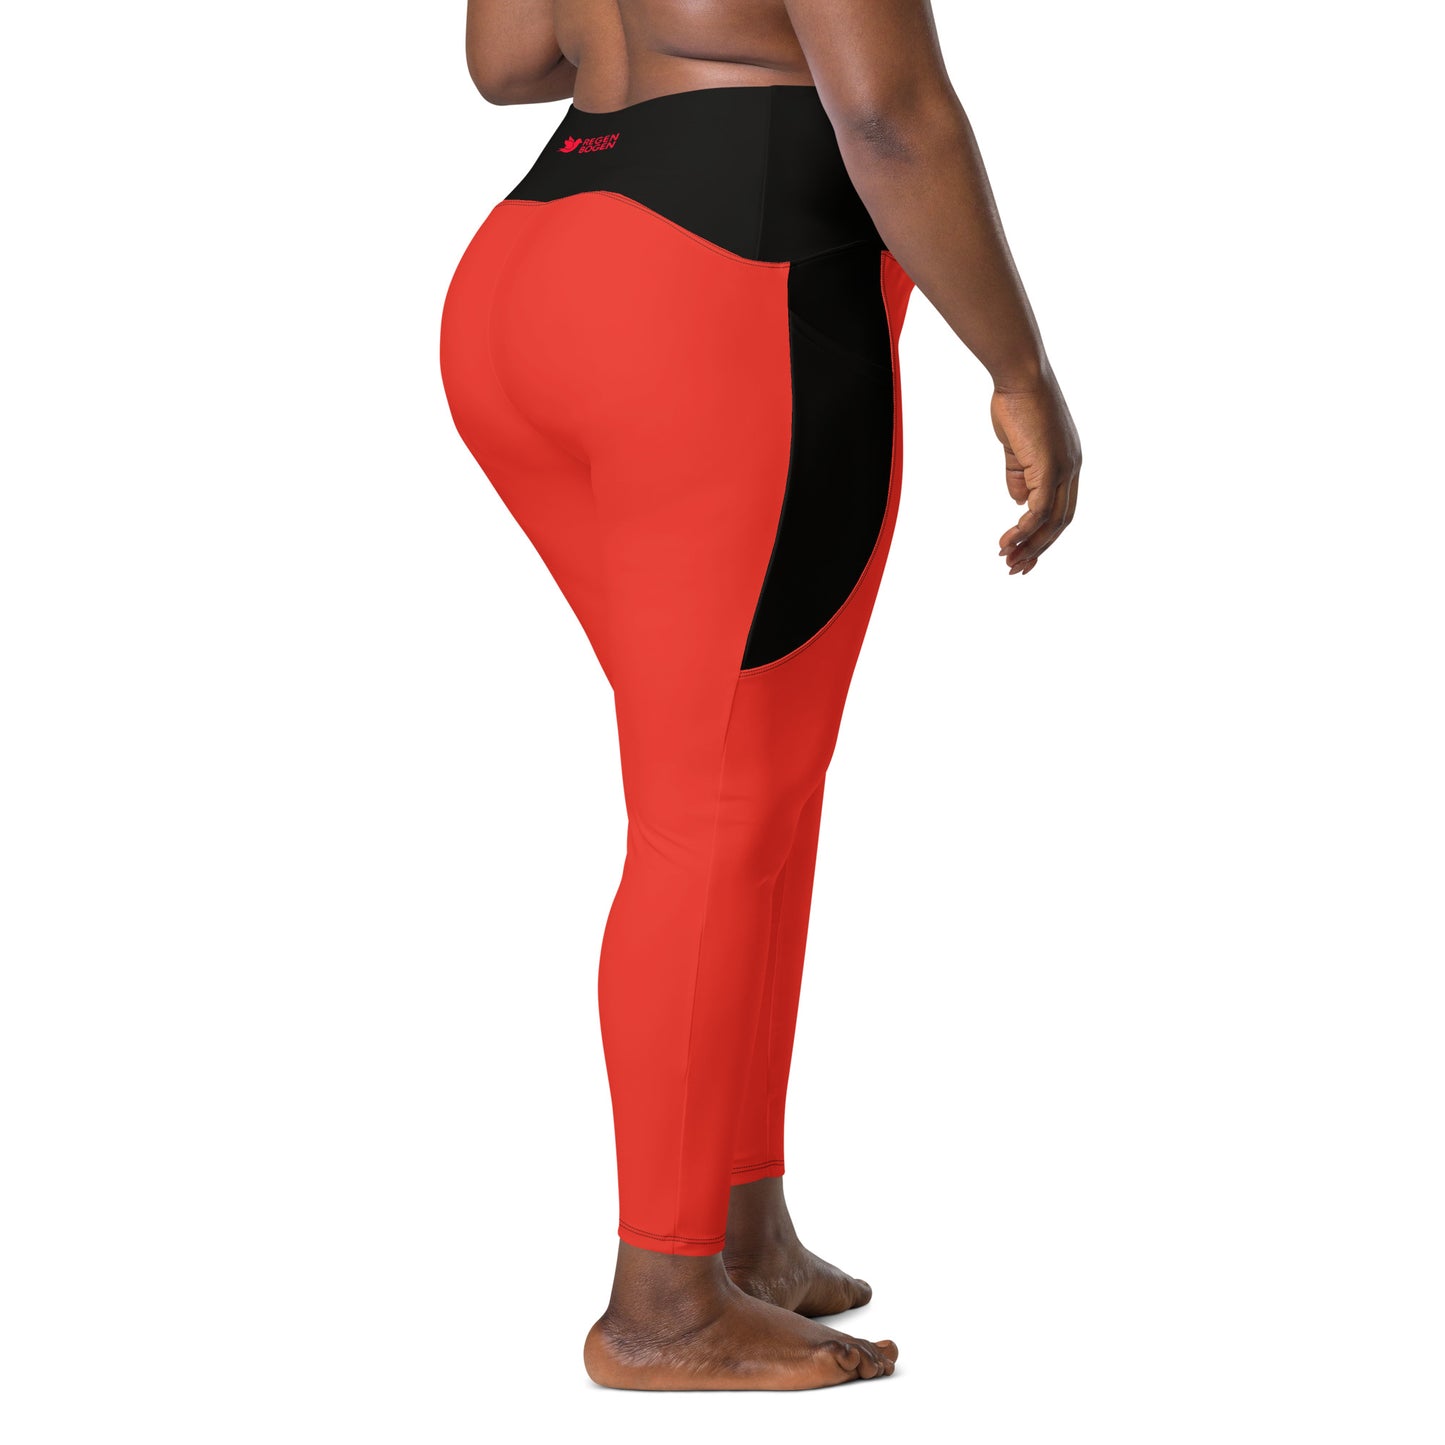 Edelweiss Colorblock High Waist 7/8 Recycled Yoga Leggings / Yoga Pants with Pockets